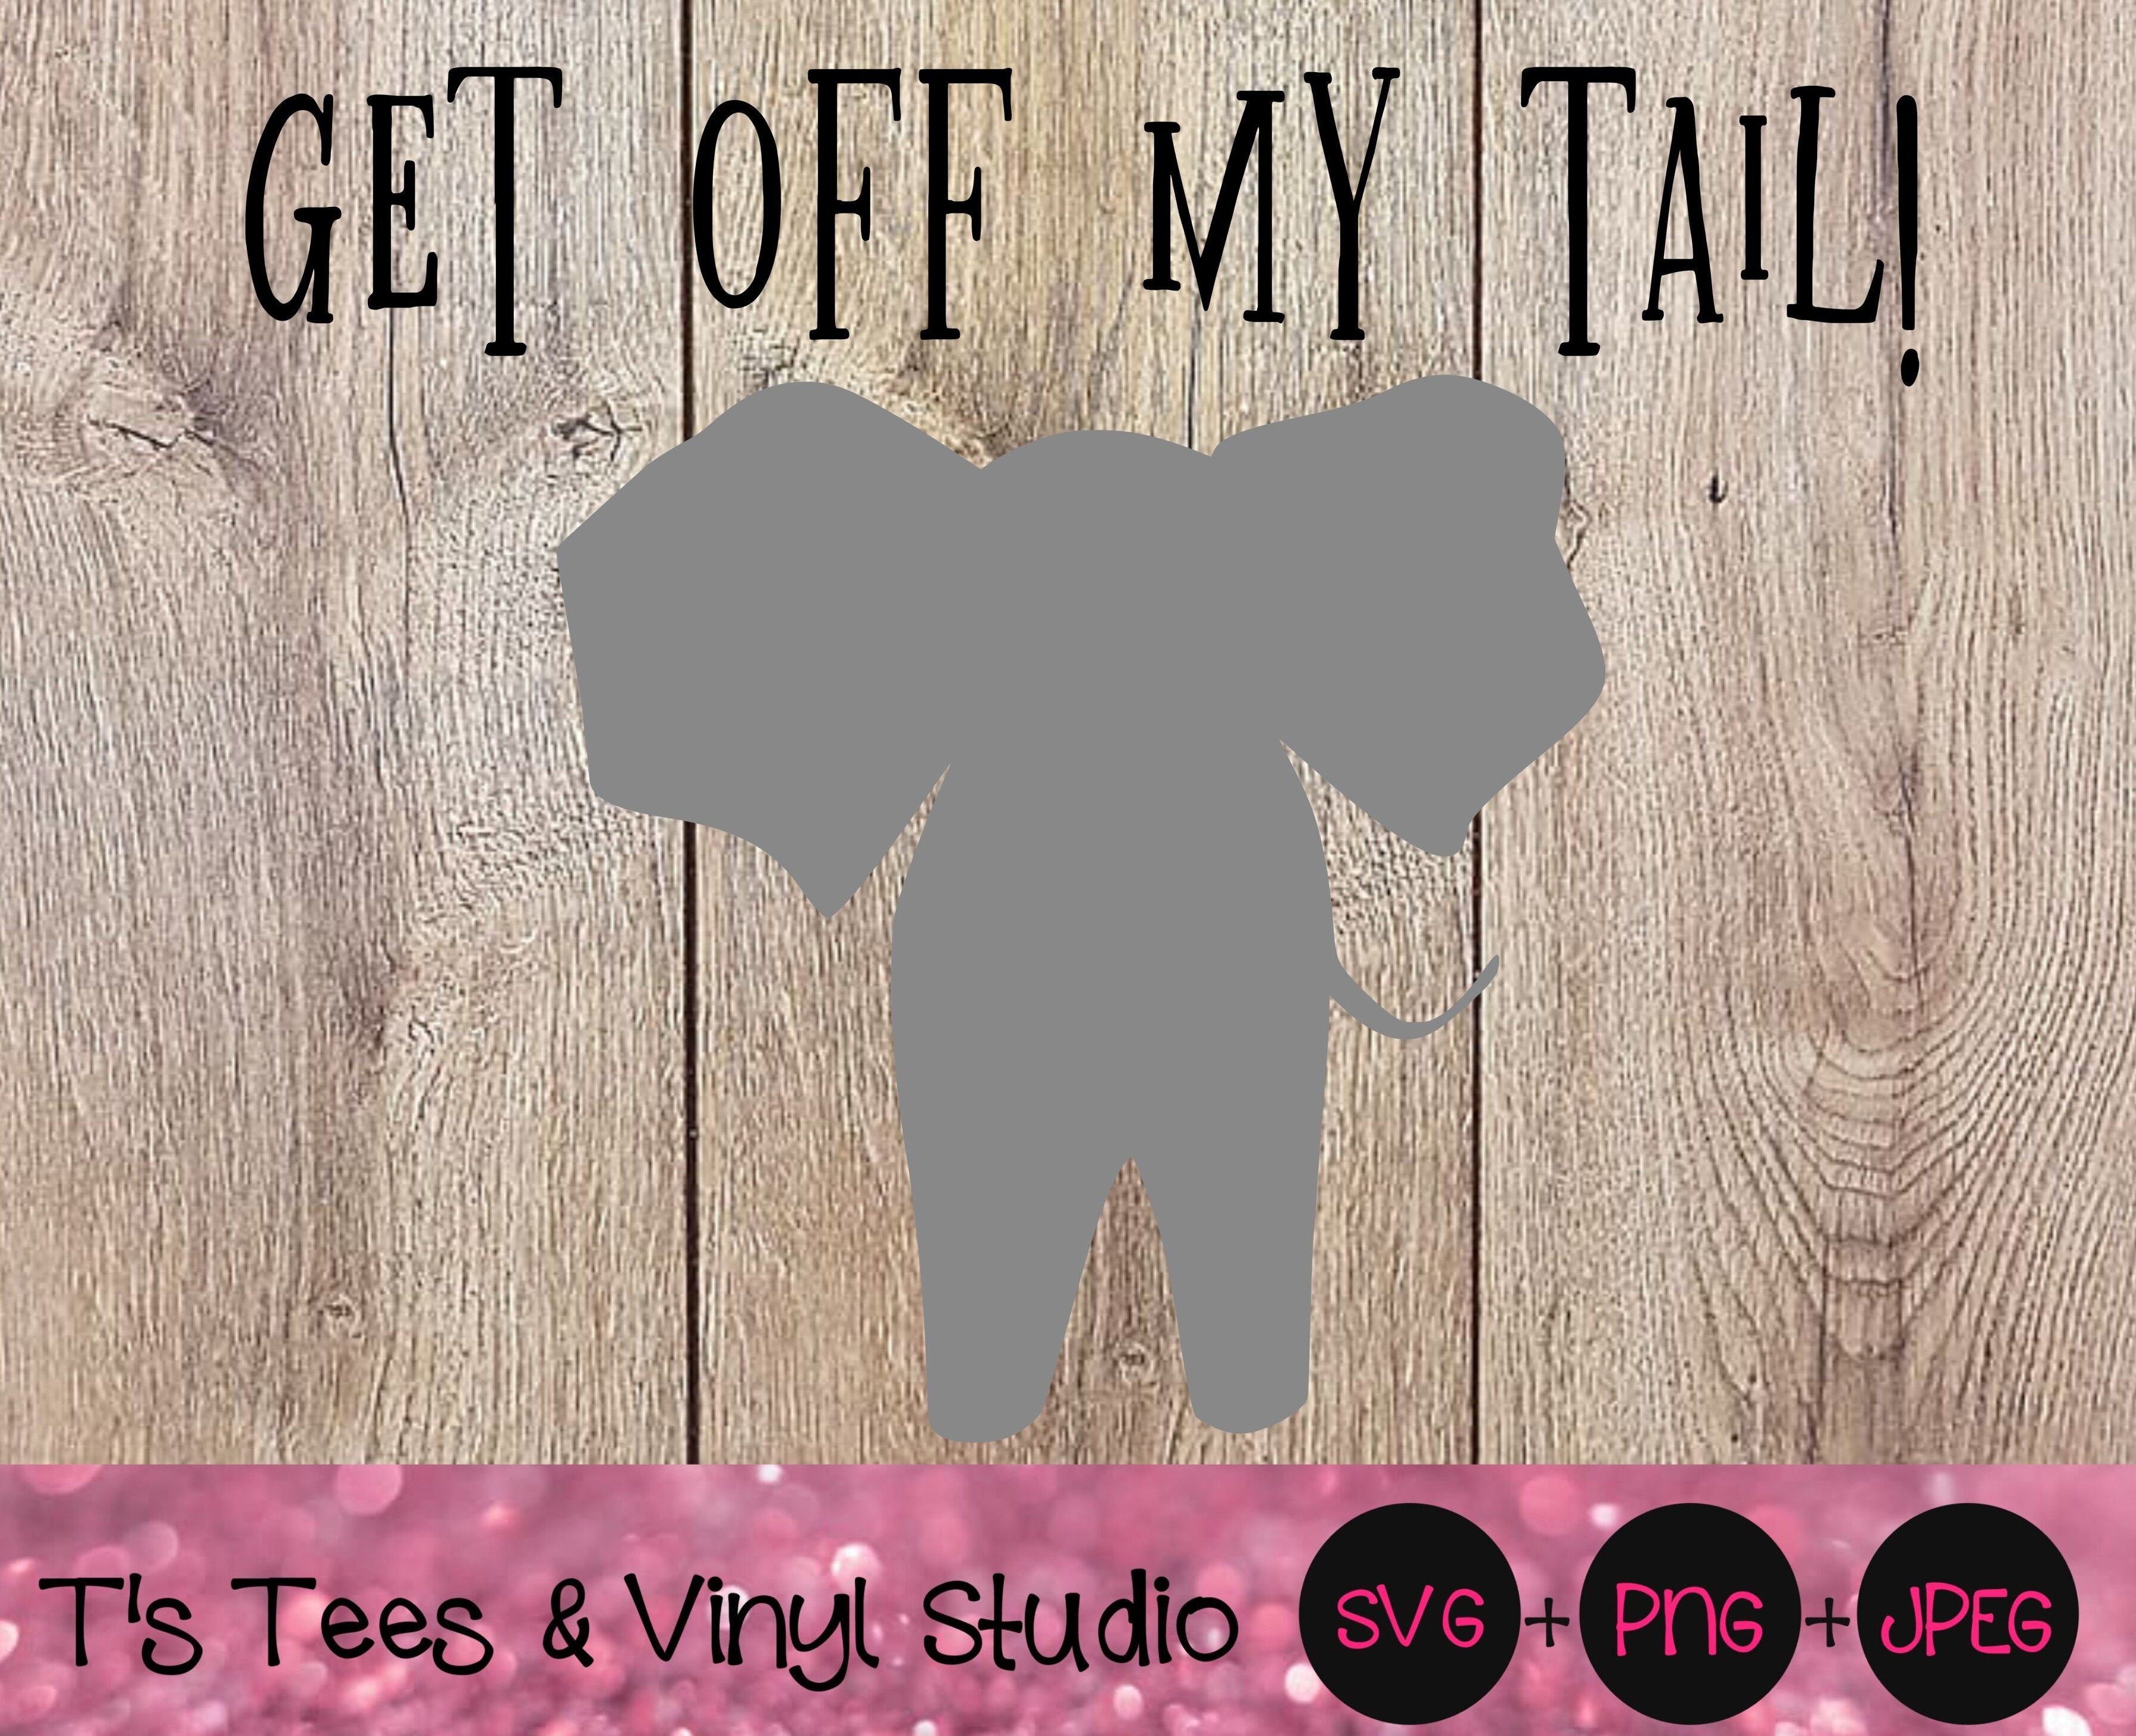 Download Get Off My Tail Elephant Svg By T S Tees Vinyl Studio Thehungryjpeg Com